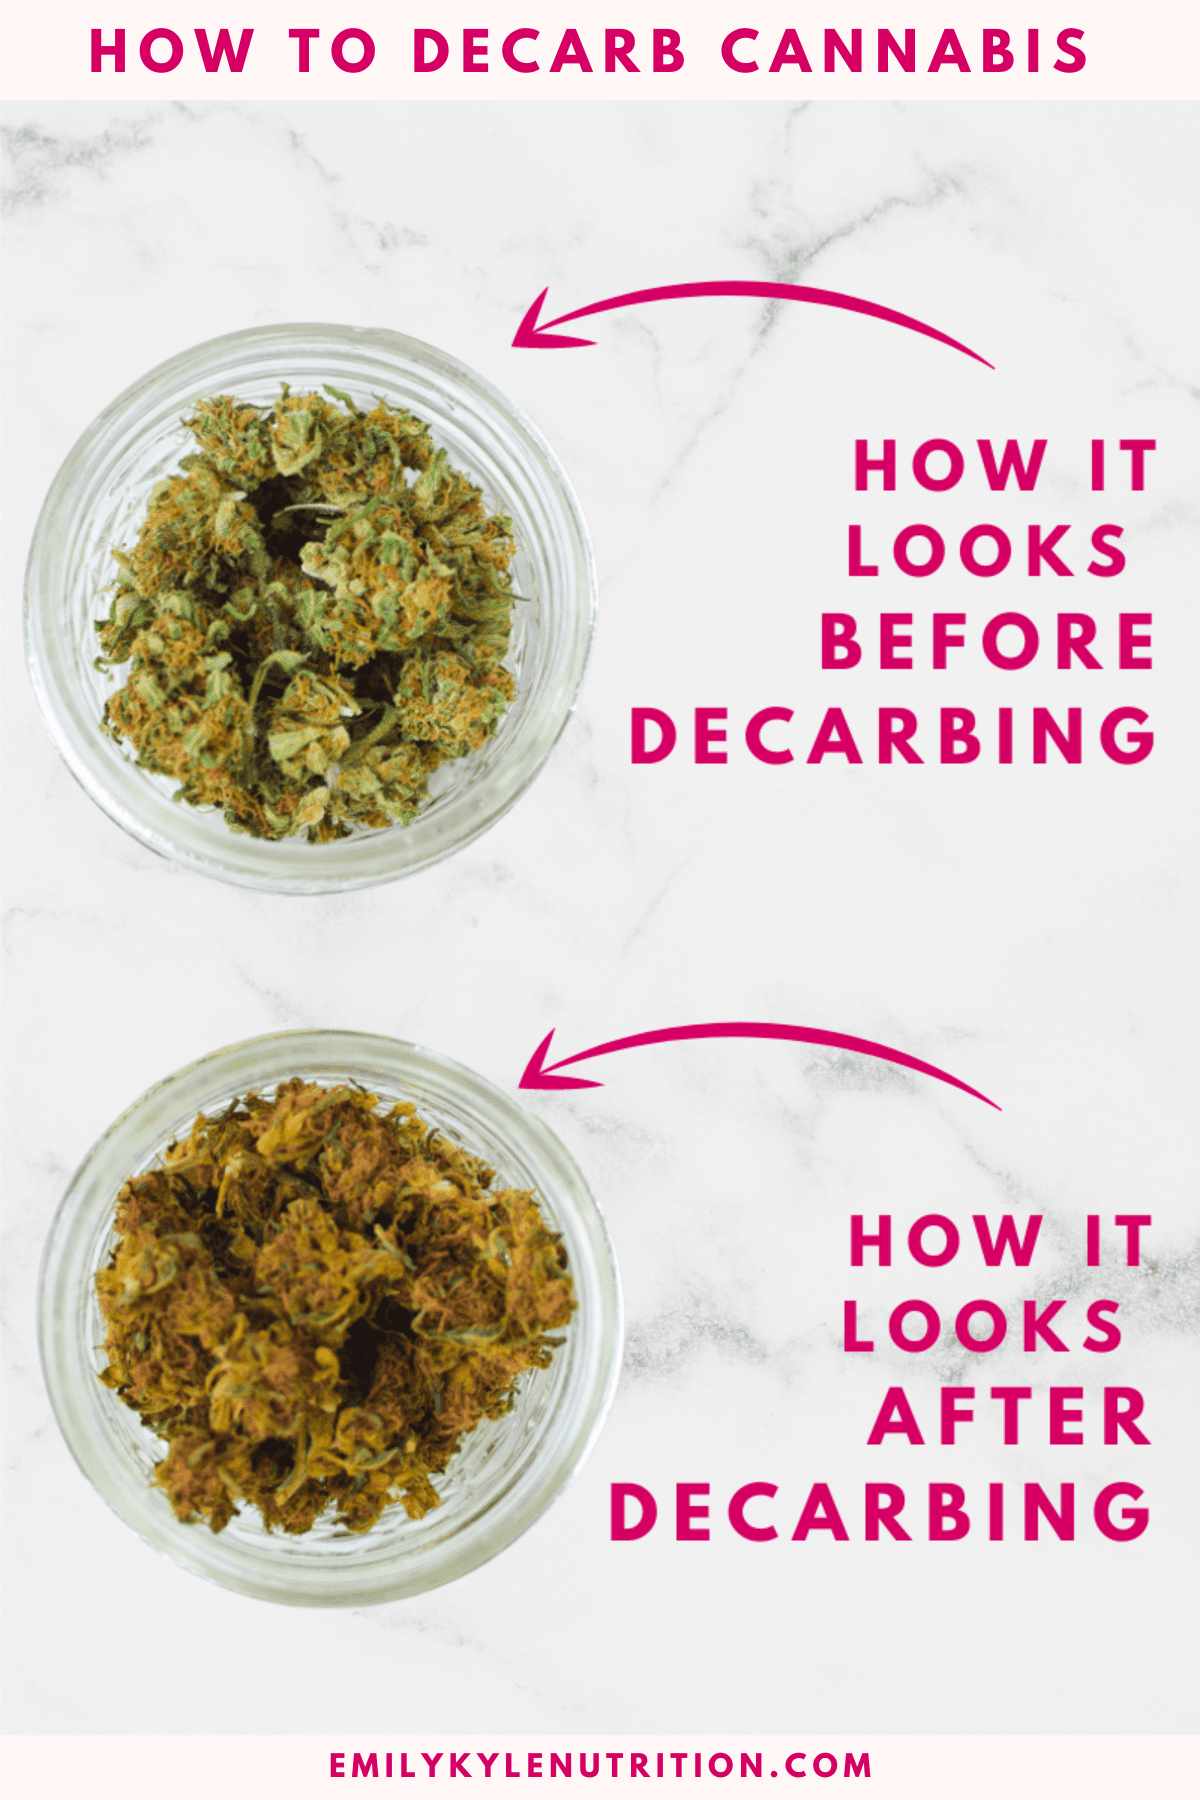 A picture of cannabis before decarboxylation and what it looks like after decarboxylation.